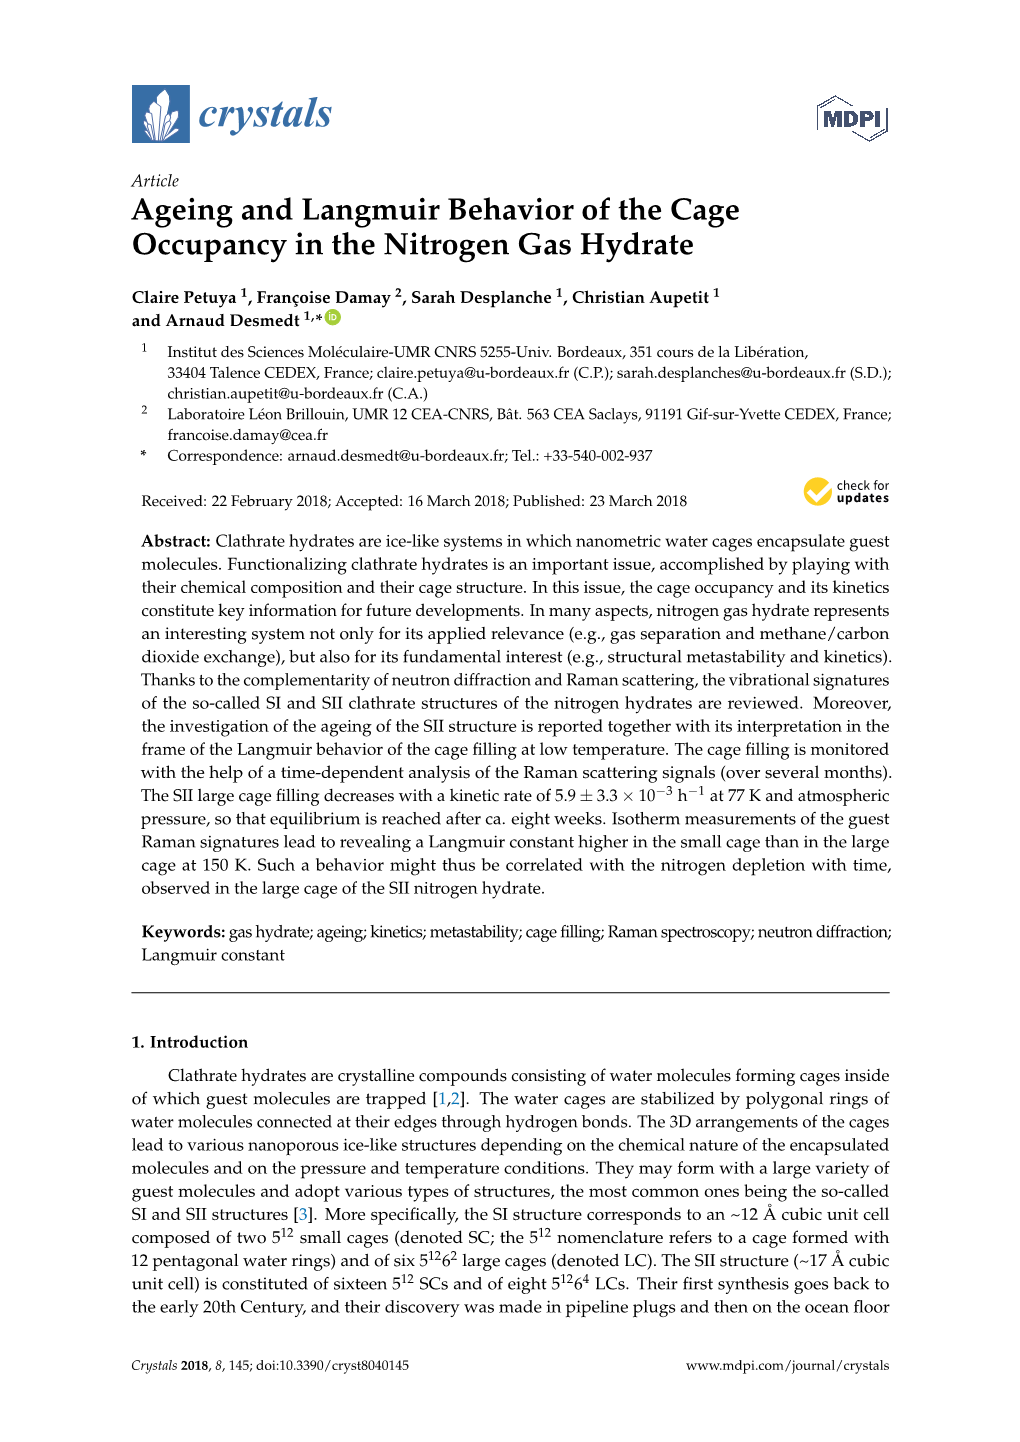 Ageing and Langmuir Behavior of the Cage Occupancy in the Nitrogen Gas Hydrate